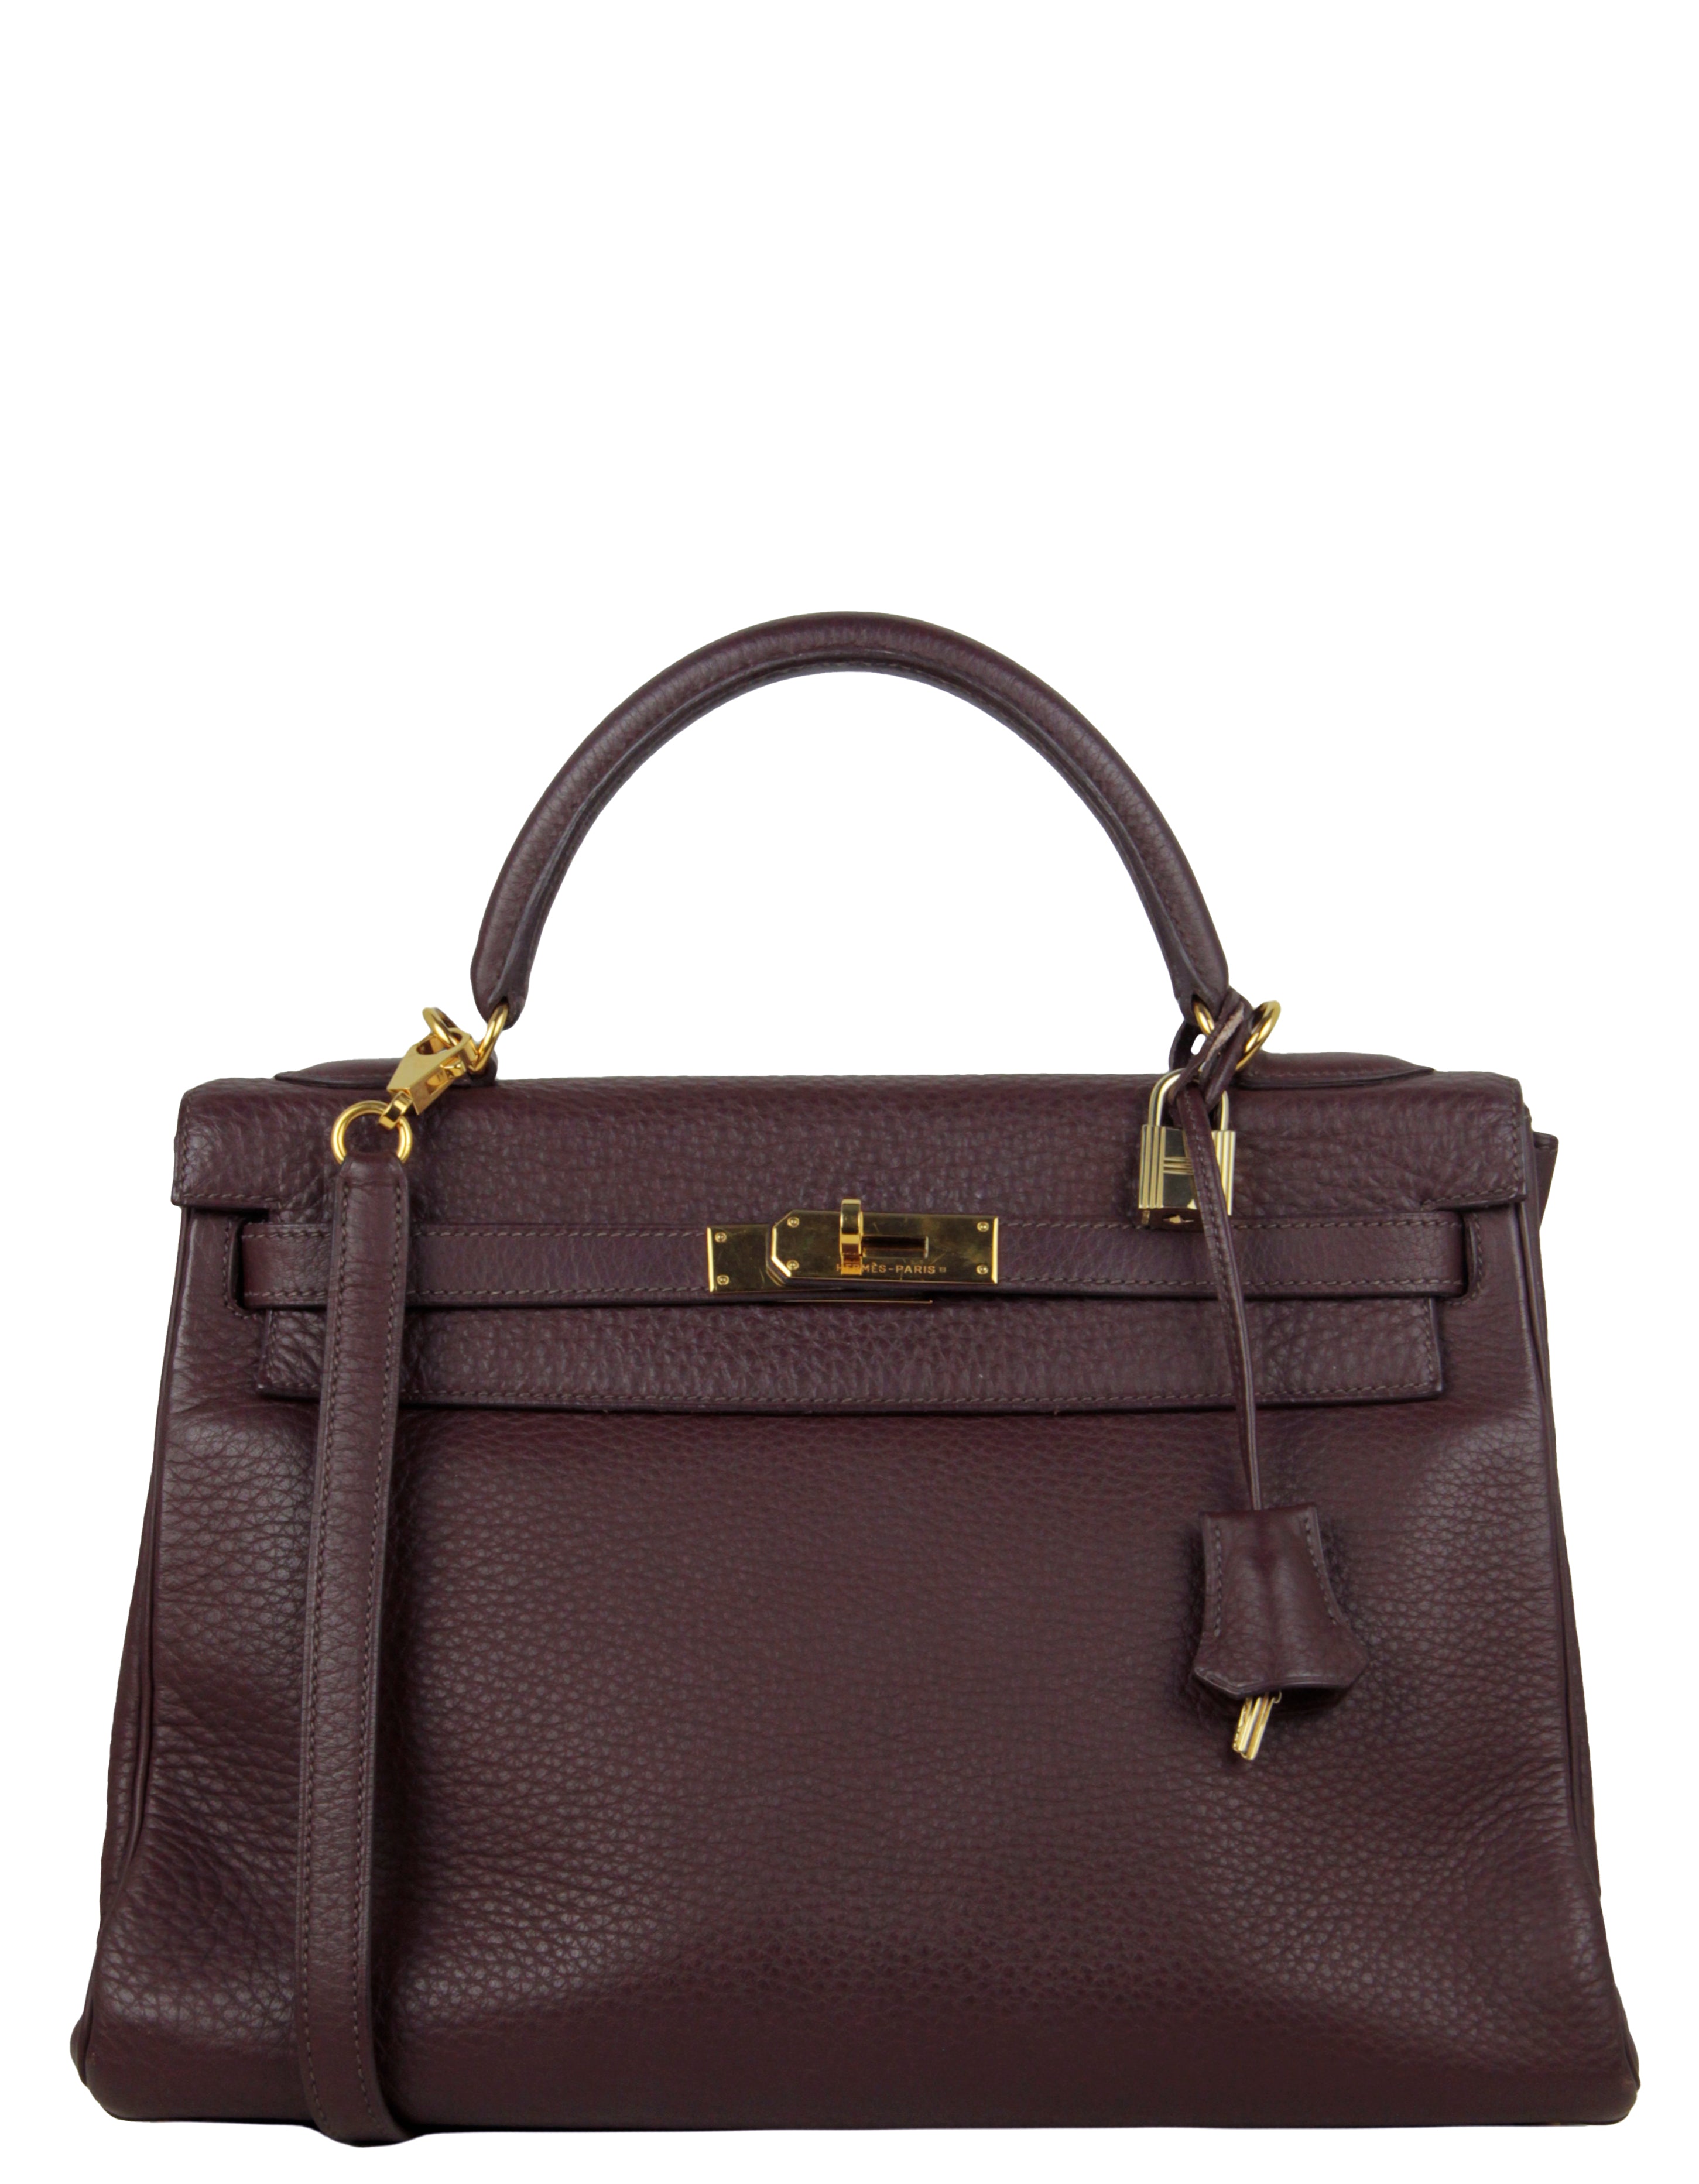 HERMÈS  BLACK RETOURNE KELLY 32CM OF CLEMENCE LEATHER WITH GOLD